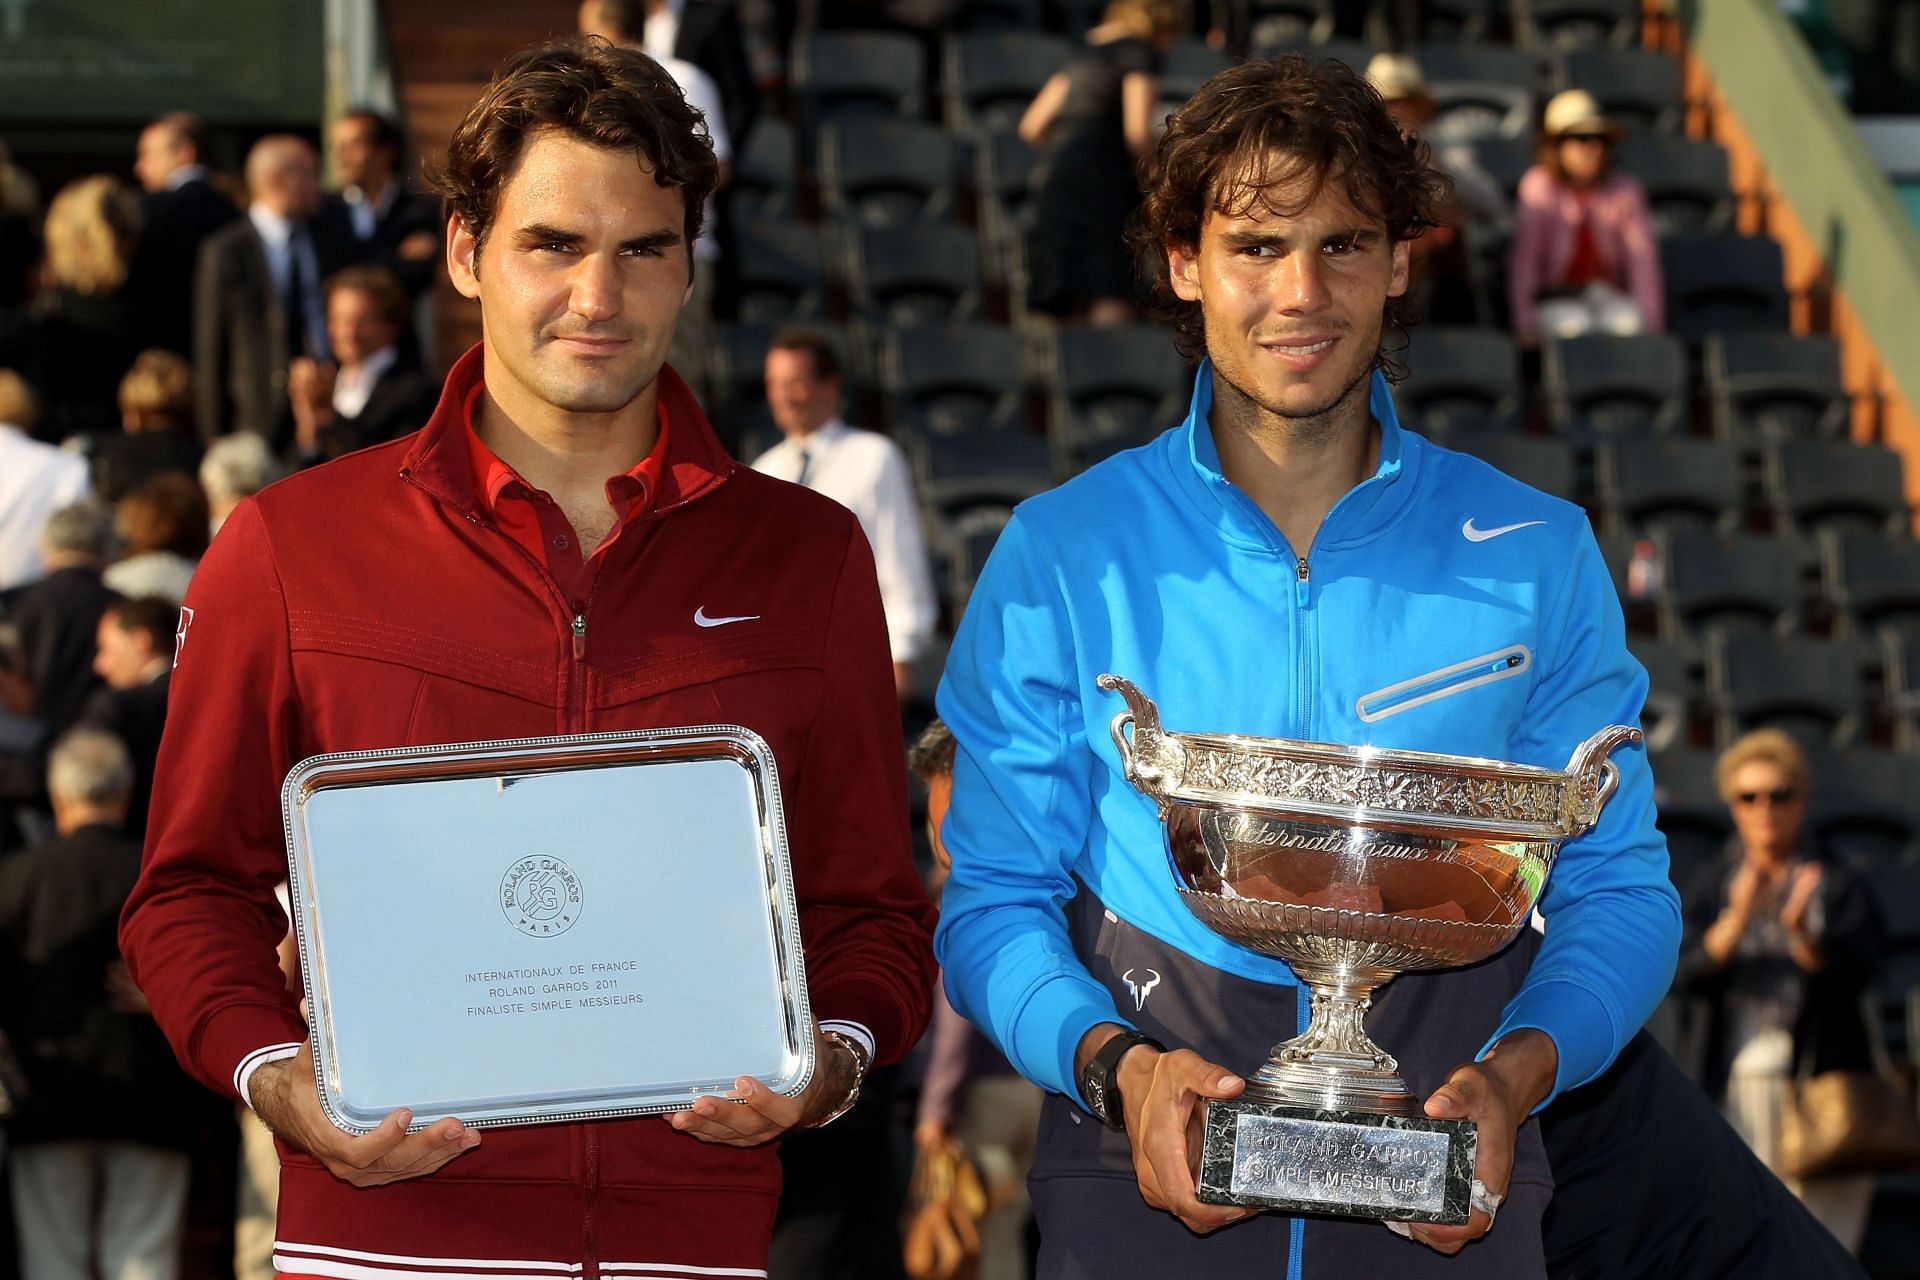 Roger Federer lost all of his Grand Slam matches against Rafael Nadal on clay